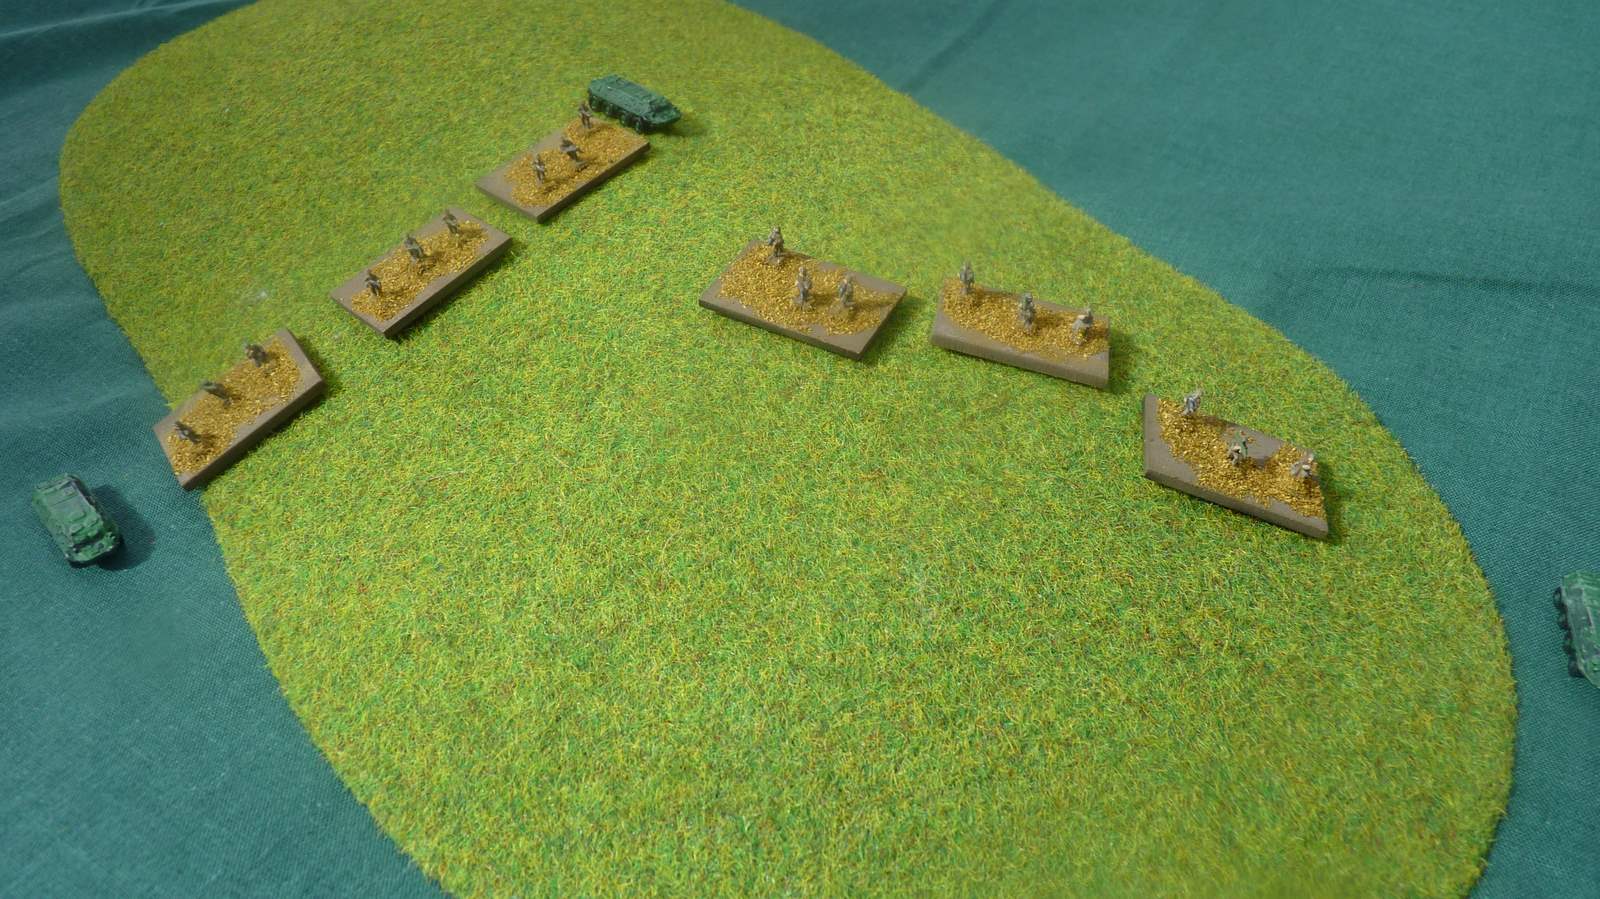 One Soviet platoon redeploys to fire at the attacking Americans